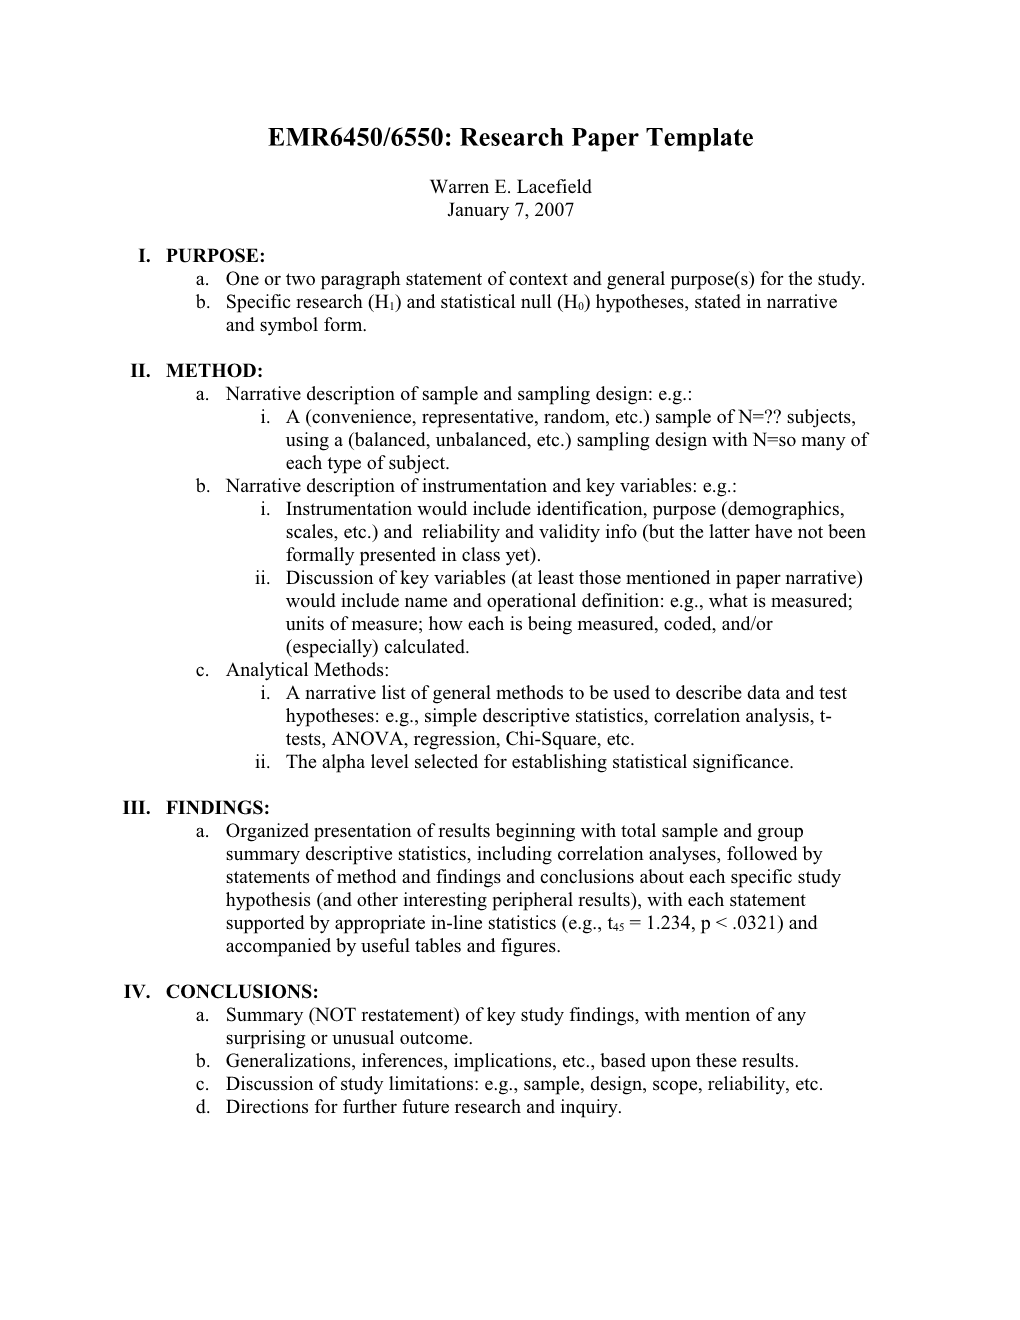 EMR6450: Research Paper Template